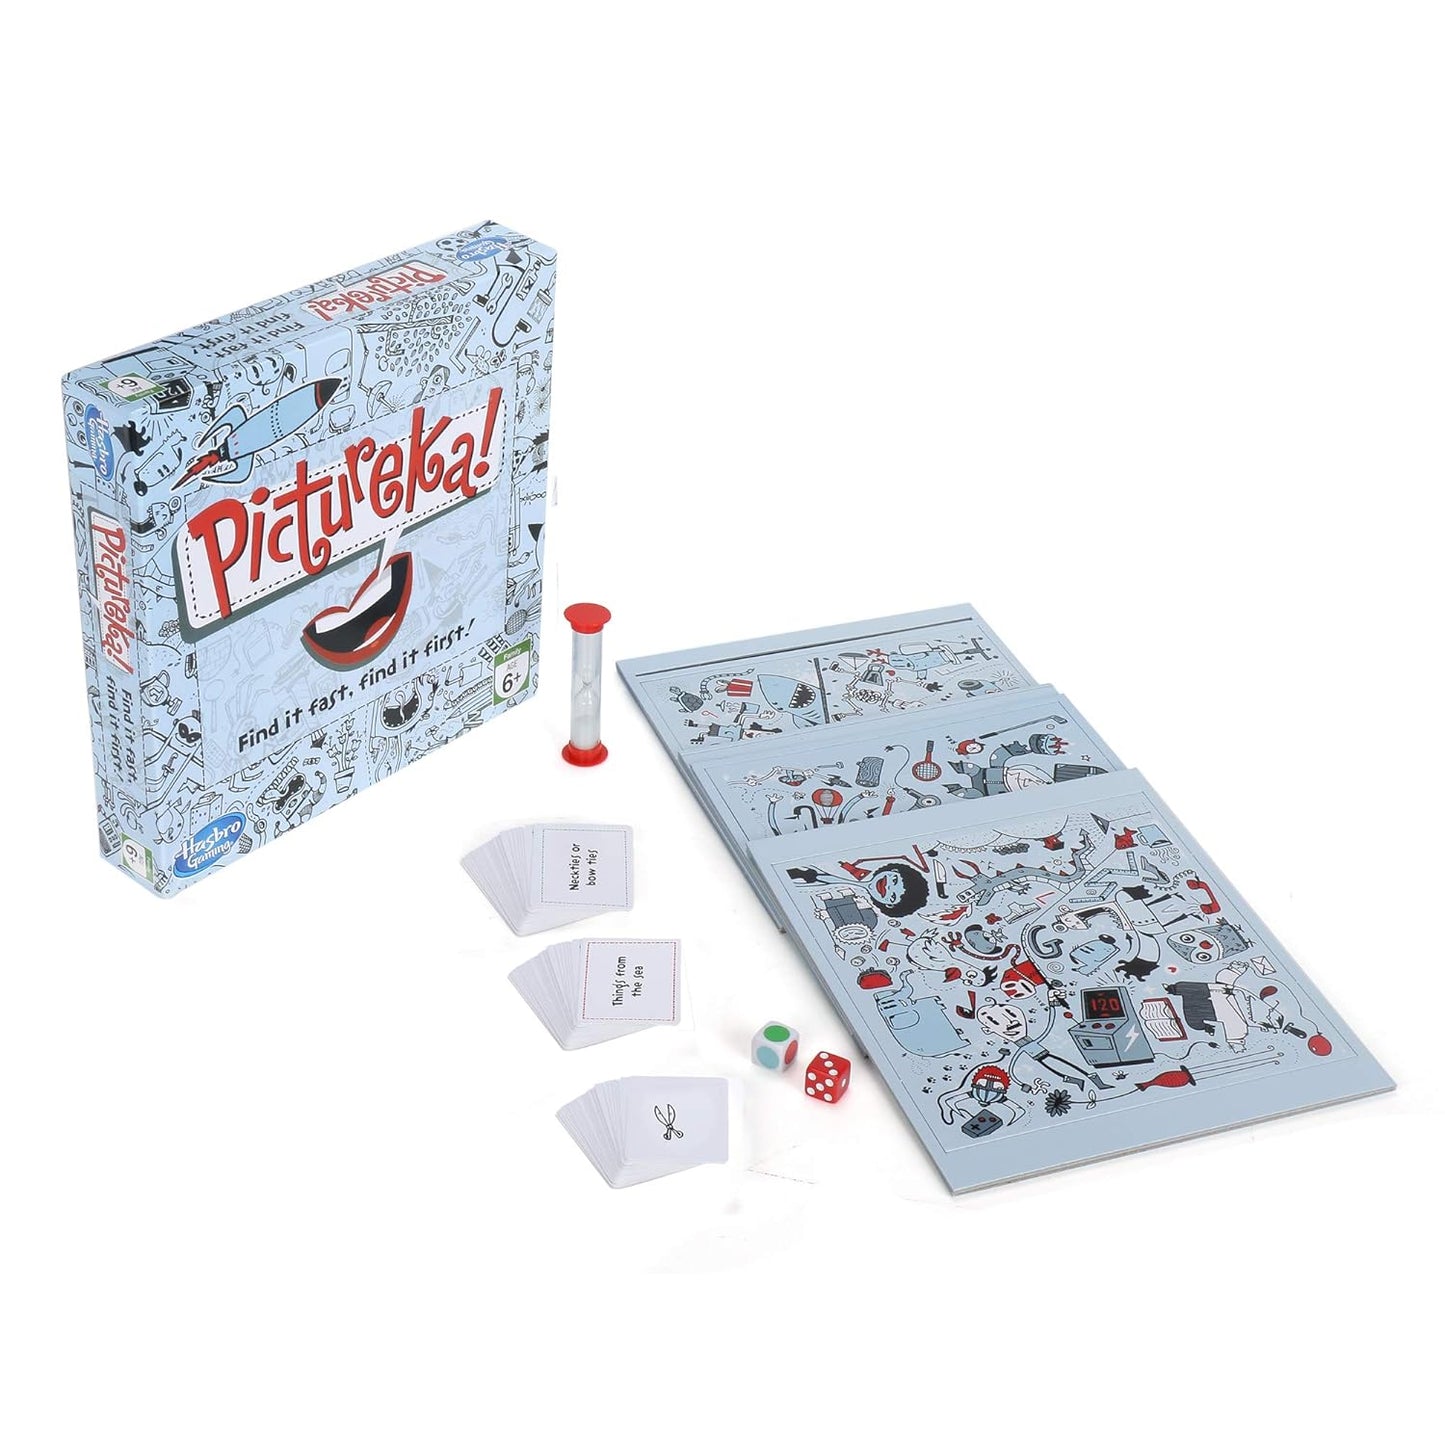 Pictureka! Board Game, Fun Board Game for Family and Kids, for Ages 6+, Indoor Classic Board Games & puzzels, Game for 2 or More Players